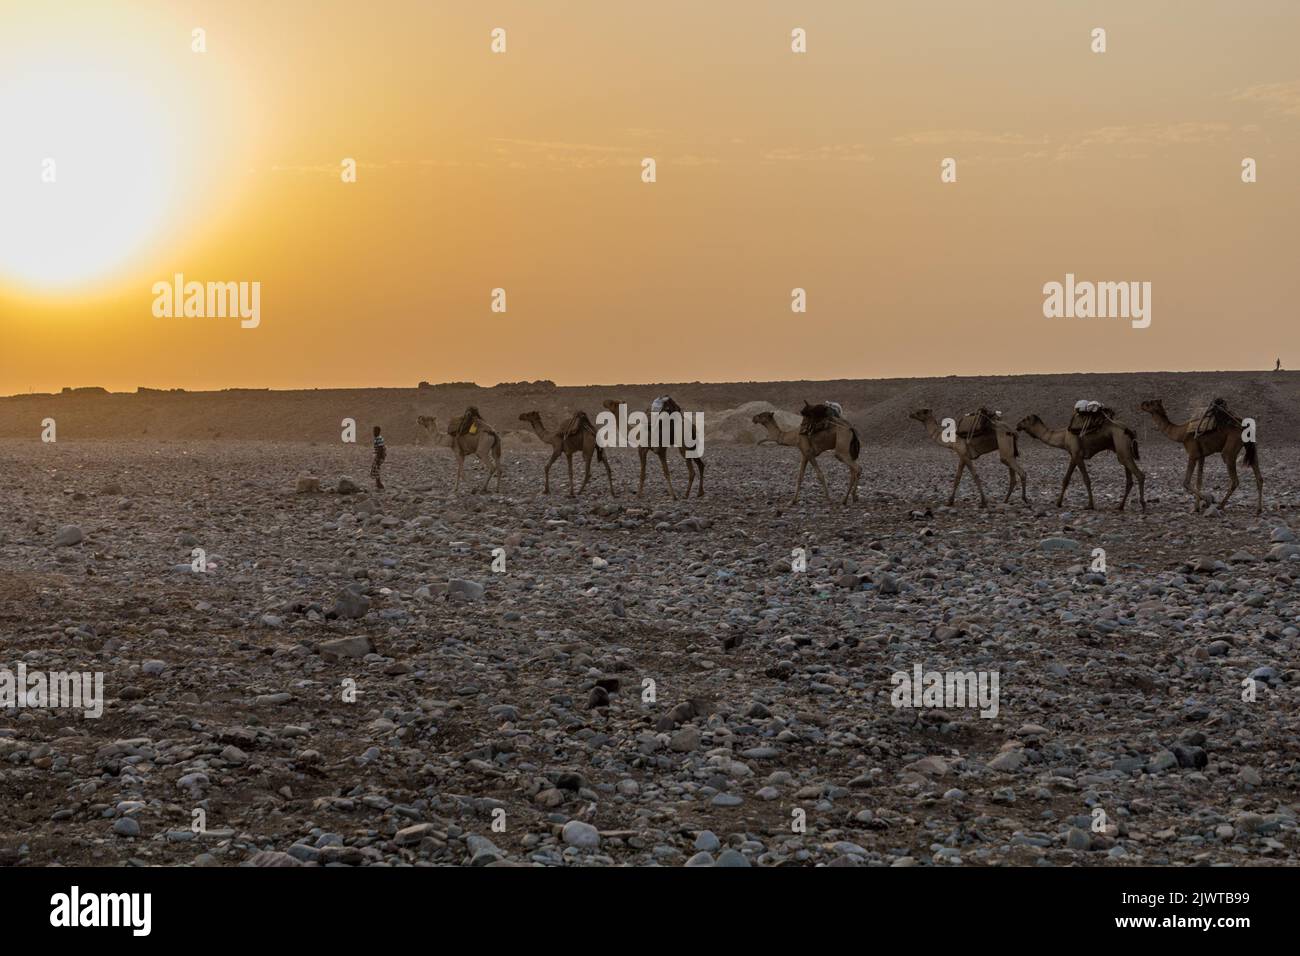 DANAKIL, ETHIOPIA - MARCH 25, 2019: Early morning view of a camel caravan in Hamed Ela, Afar tribe settlement in the Danakil depression, Ethiopia. Thi Stock Photo